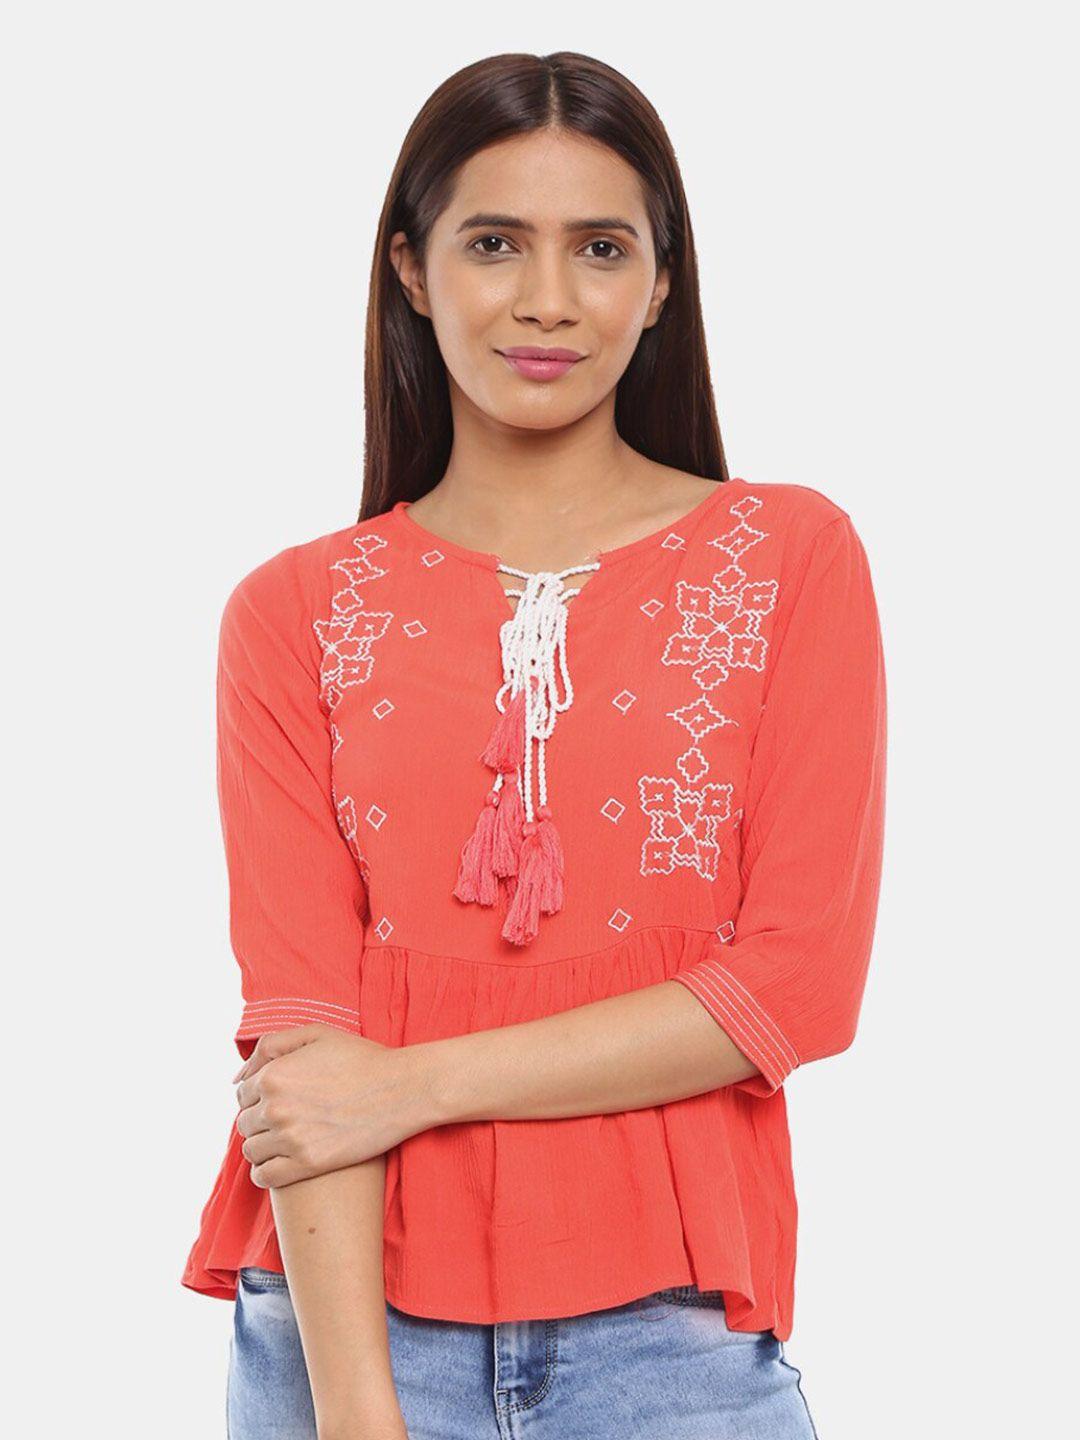 v-mart women western solid red embroidered tie-up neck top